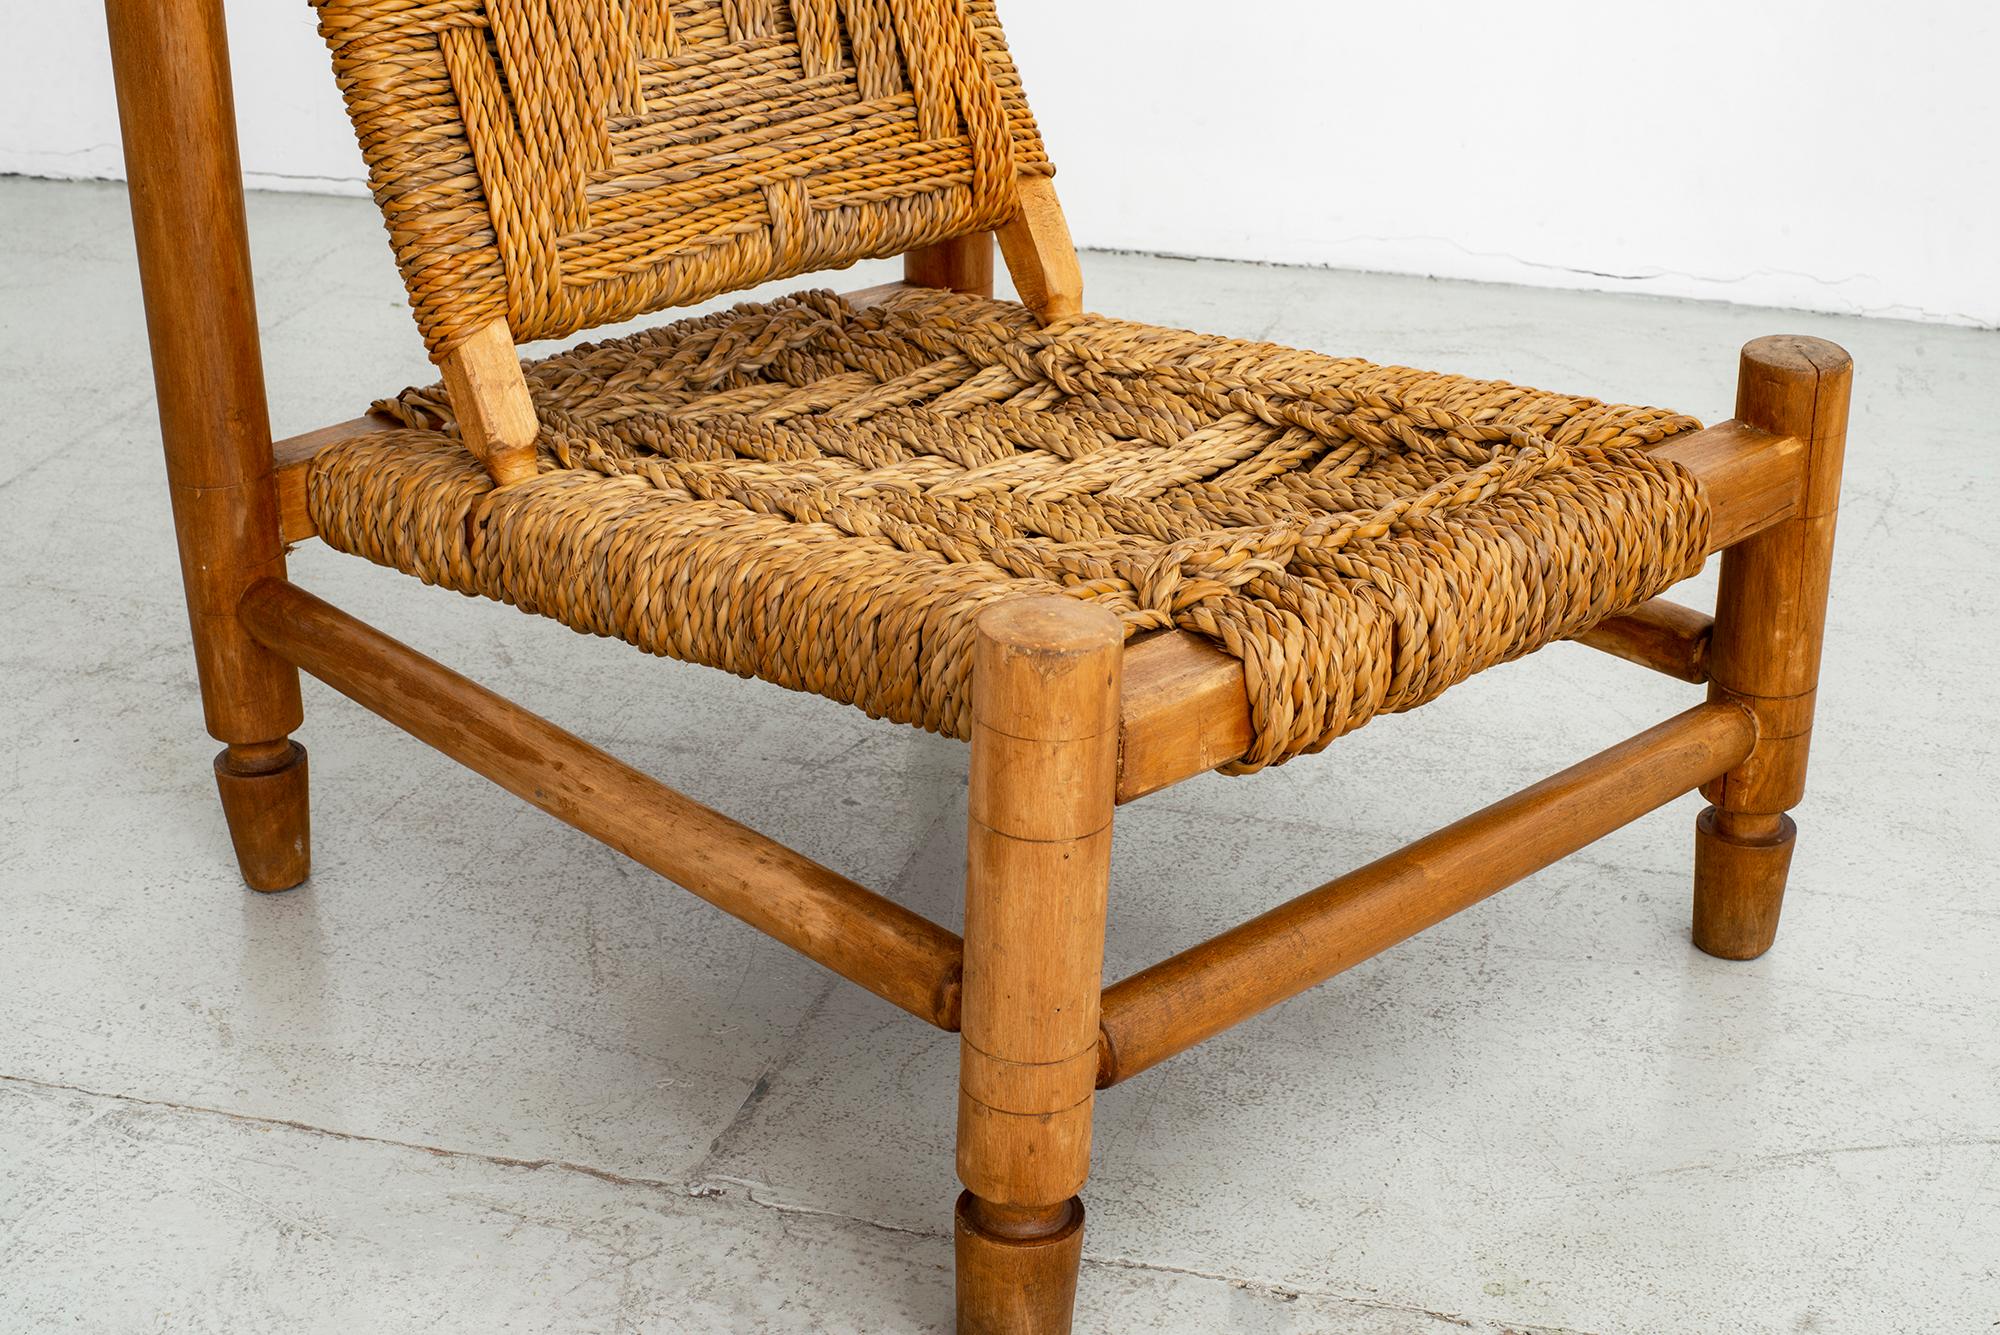 Audoux Minet Rope Chairs 1